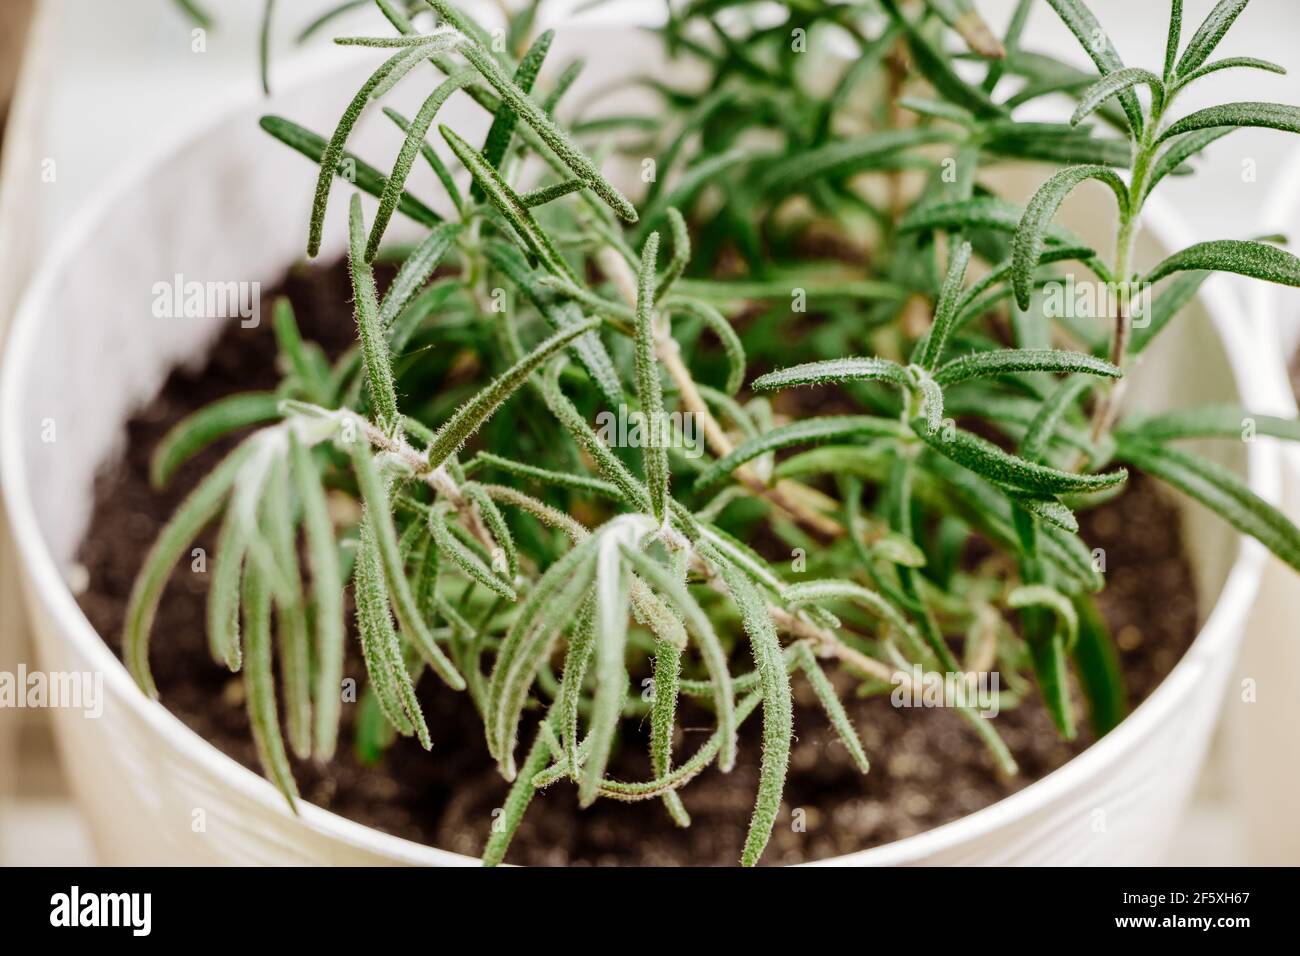 Fresh green rosemary in pot. Home medicinal plant close-up. Gardening and growing herbs for cooking. Eco-friendly lifestyle. Stock Photo